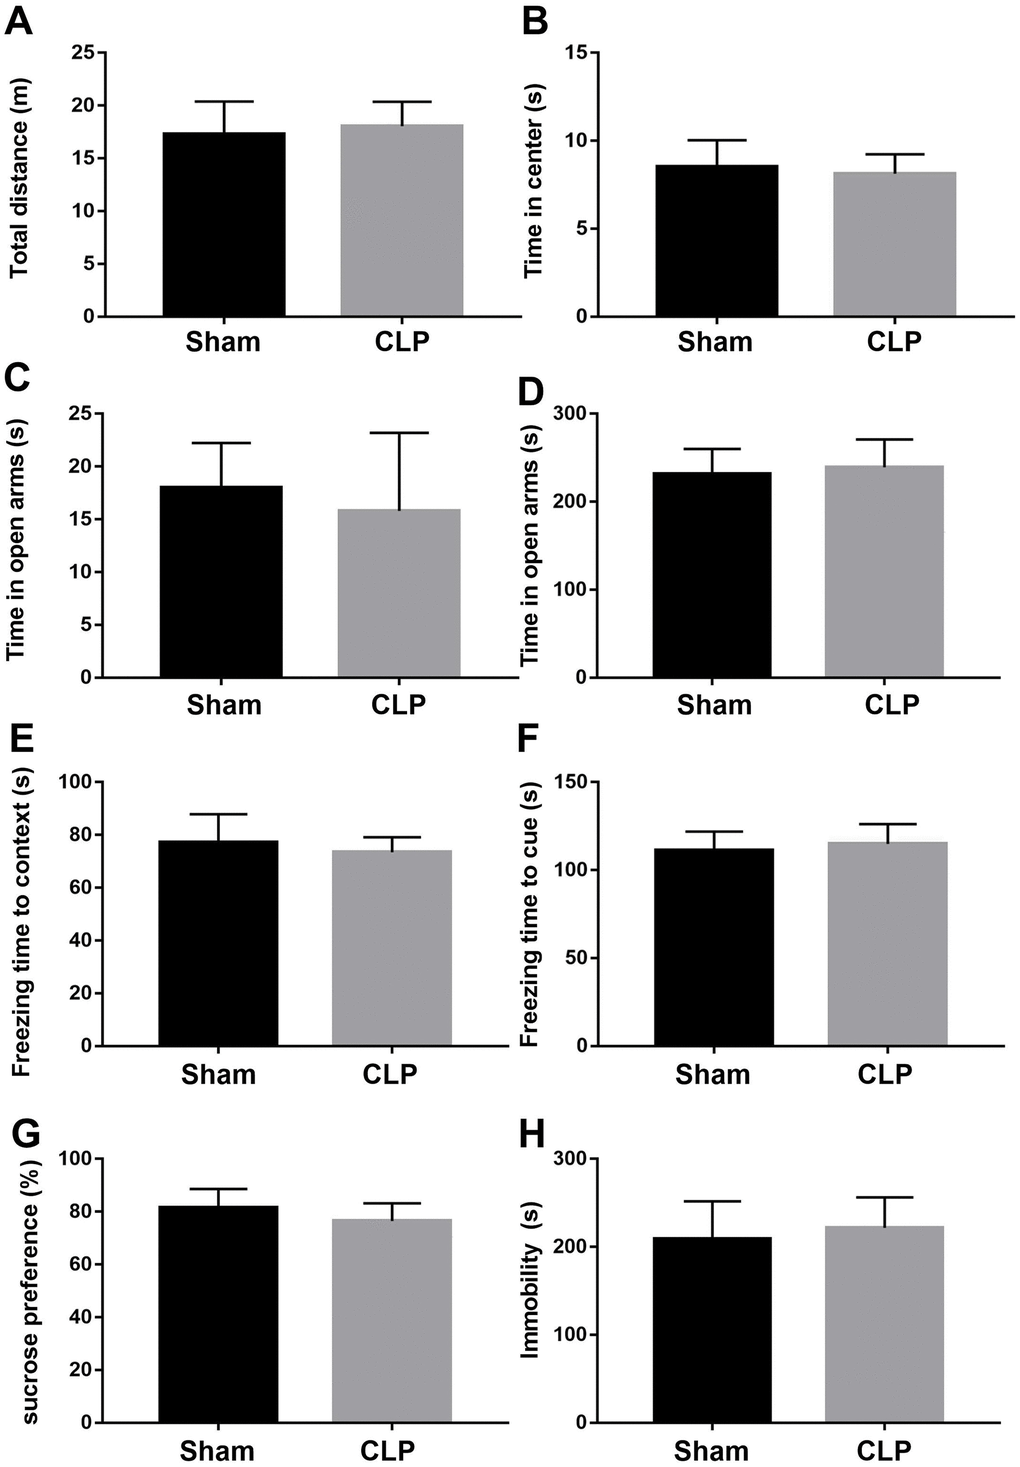 CLP did not induce neurobehavioral abnormities. (A, B) CLP had no effect on the total distance traveled and time spent in the center of the open arena compared with sham group. (C, D) There was no difference in time in the open arms and closed arms between groups. (E, F) There was no difference in freezing time to context or tone in fear conditioning tests between groups. (G, H) CLP had no effect on preference for sucrose or immobility compared with sham group. Data are presented as the mean ± SEM, n = 10-12, *P 